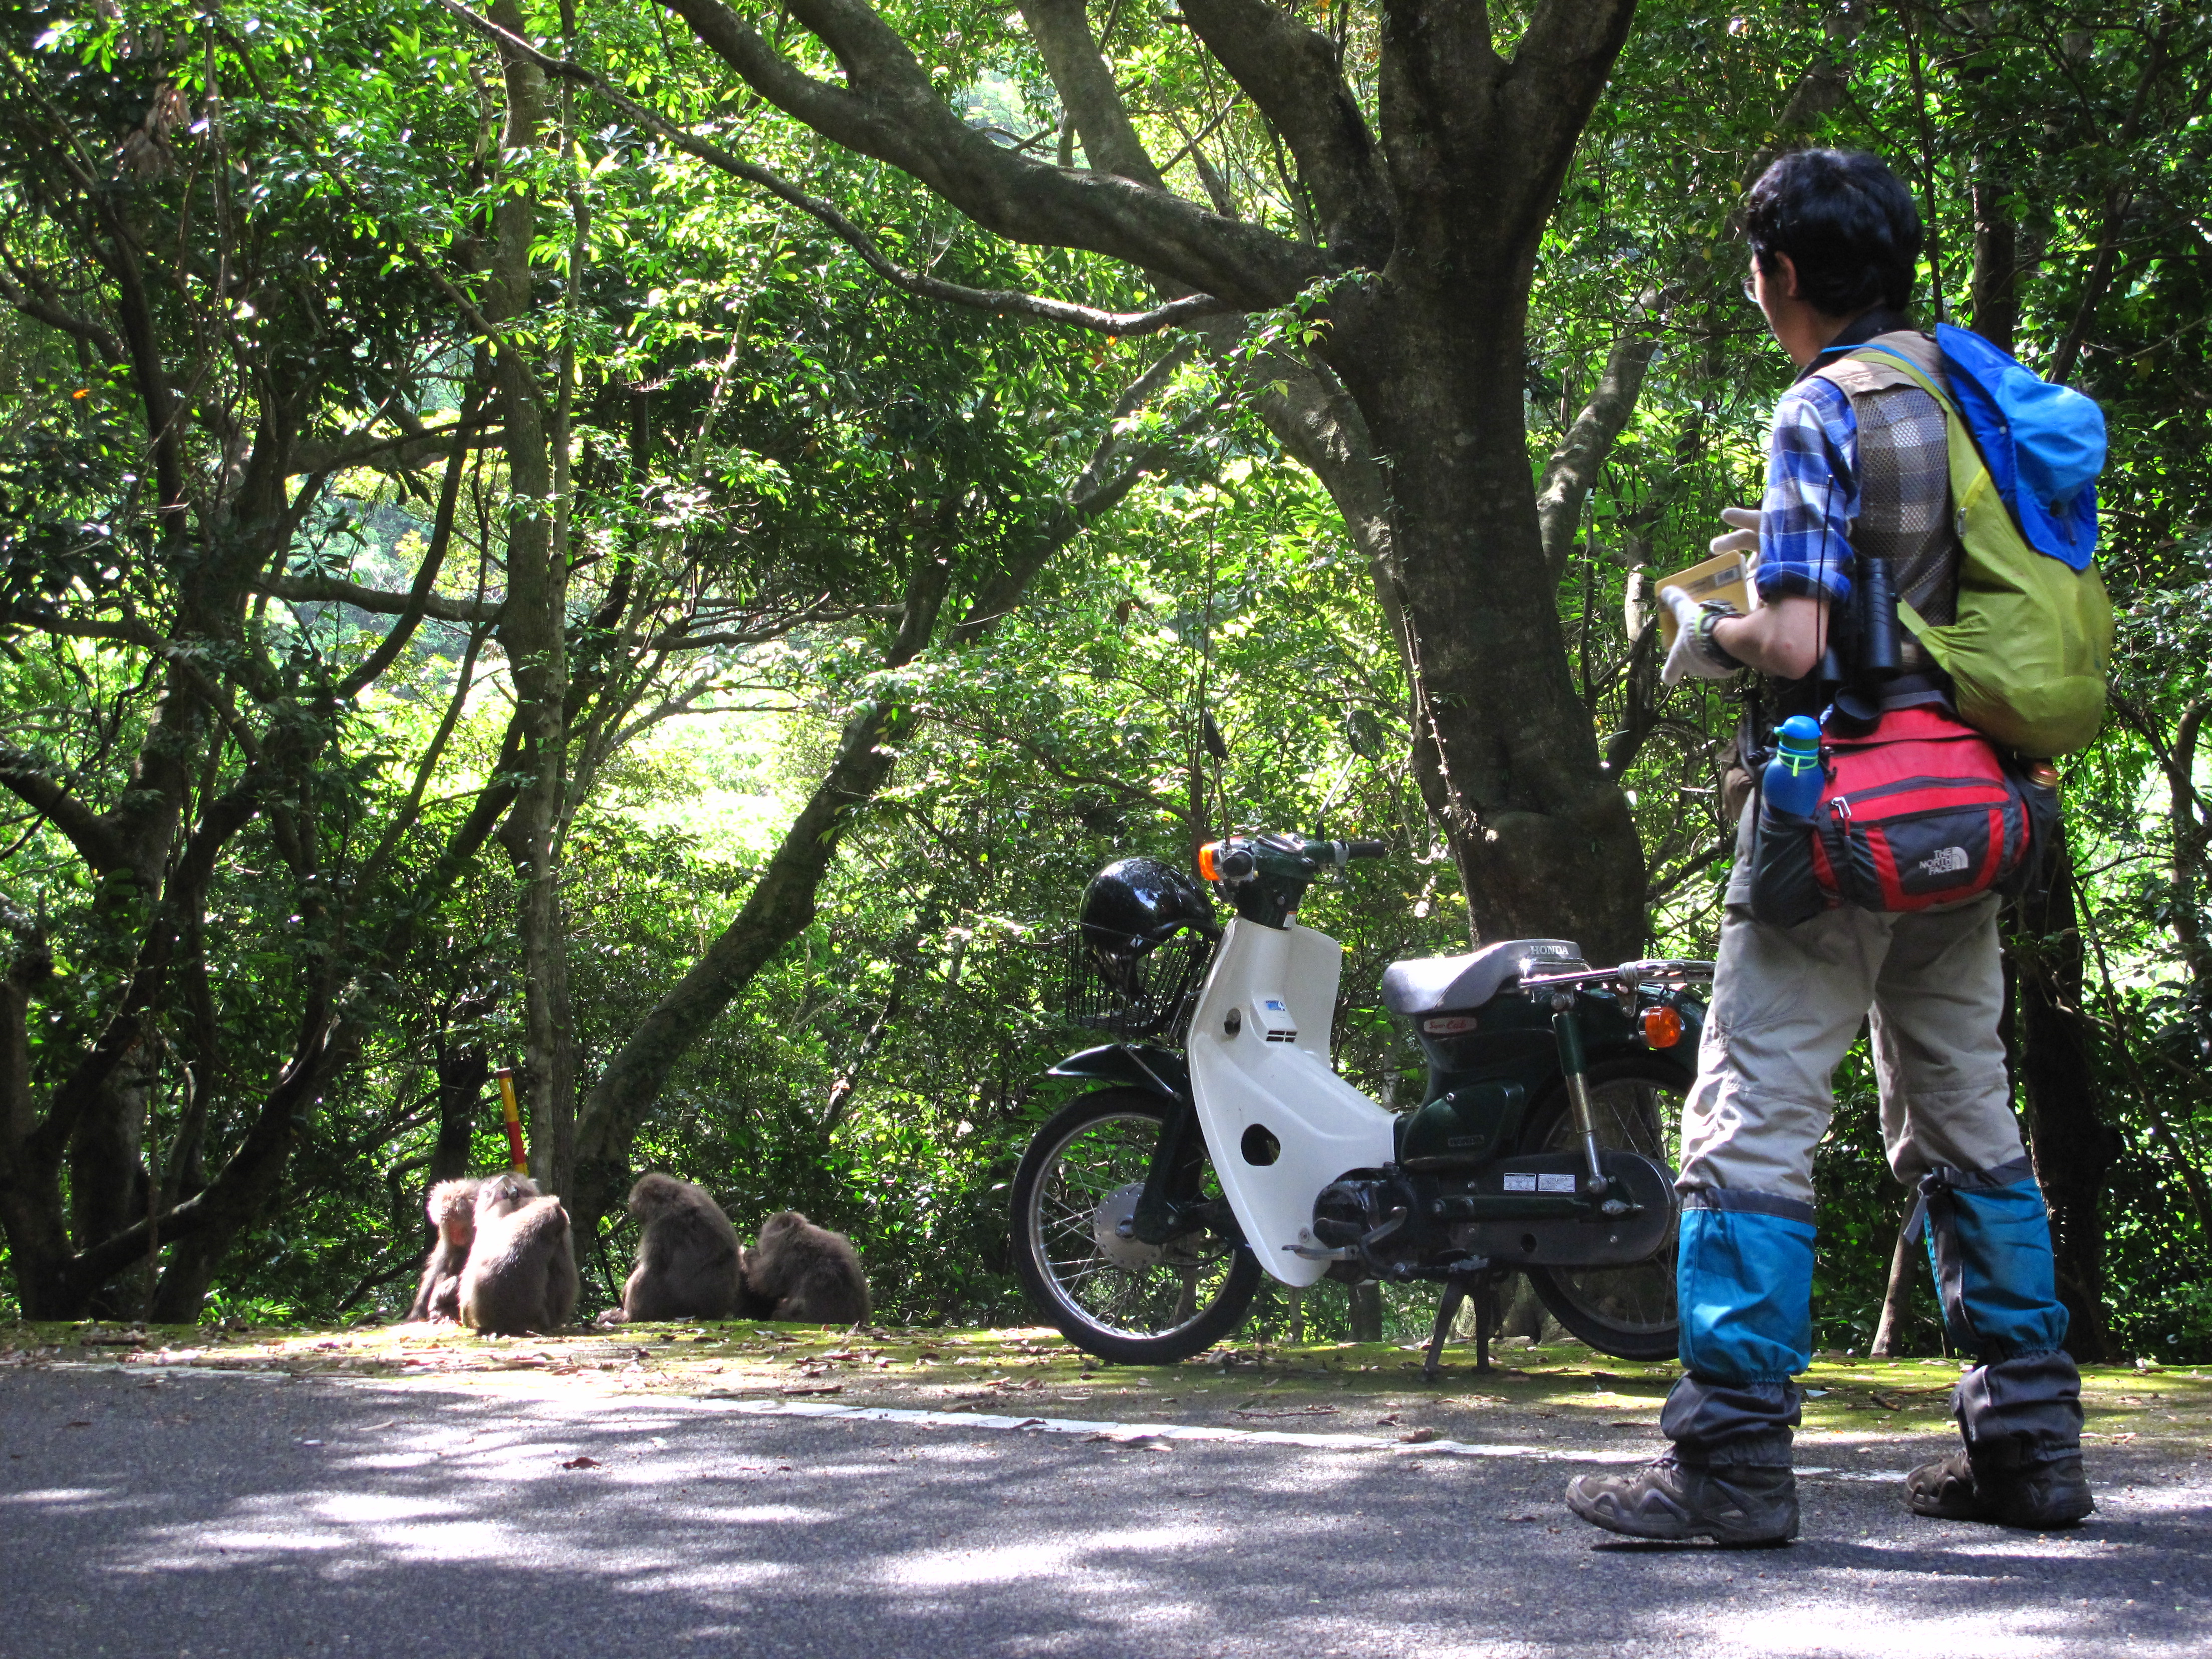 Working with macaques in Yakushima, Japan